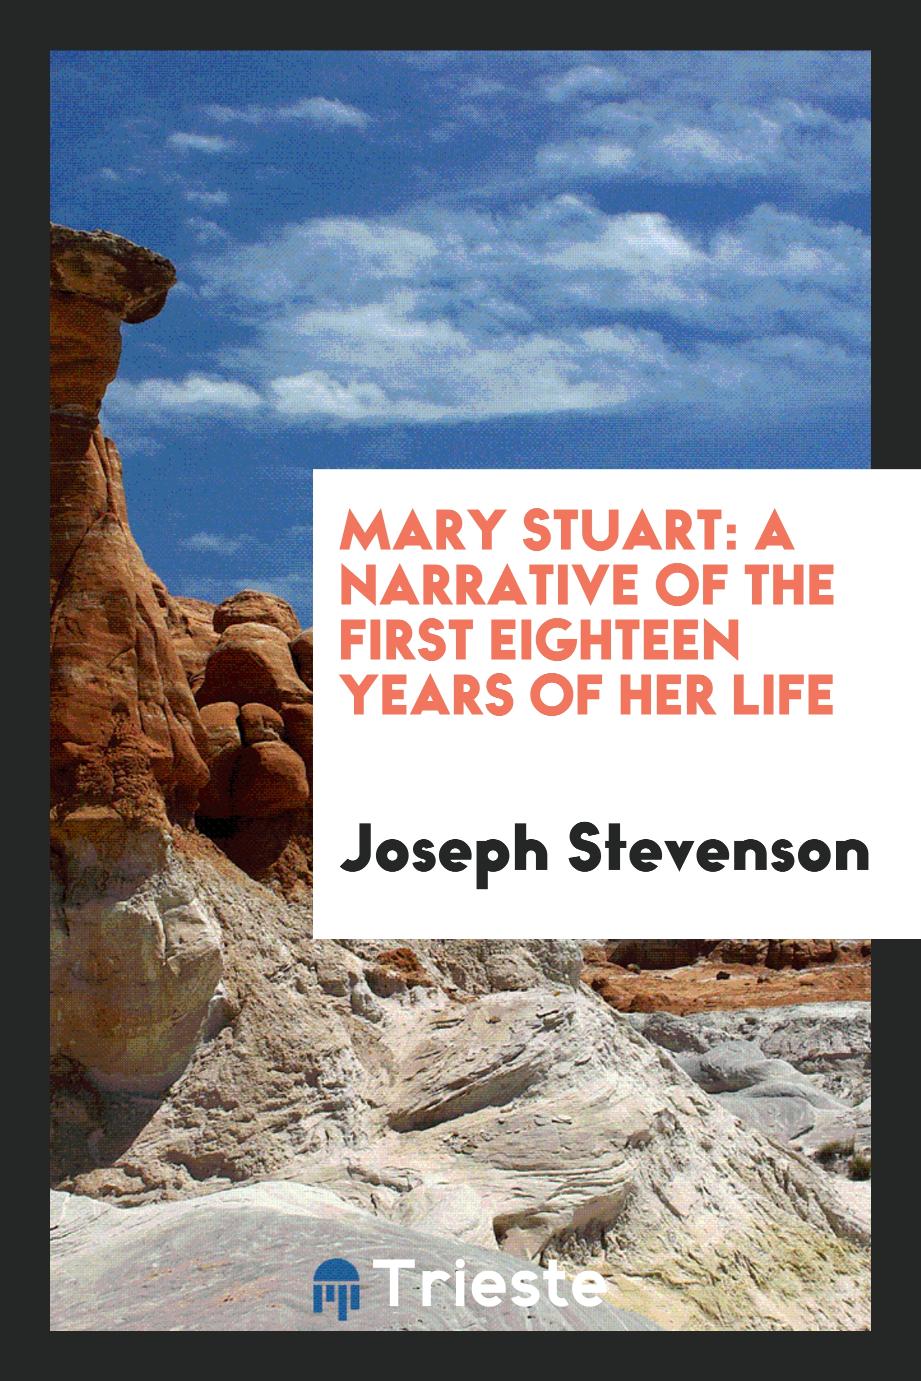 Mary Stuart: a narrative of the first eighteen years of her life